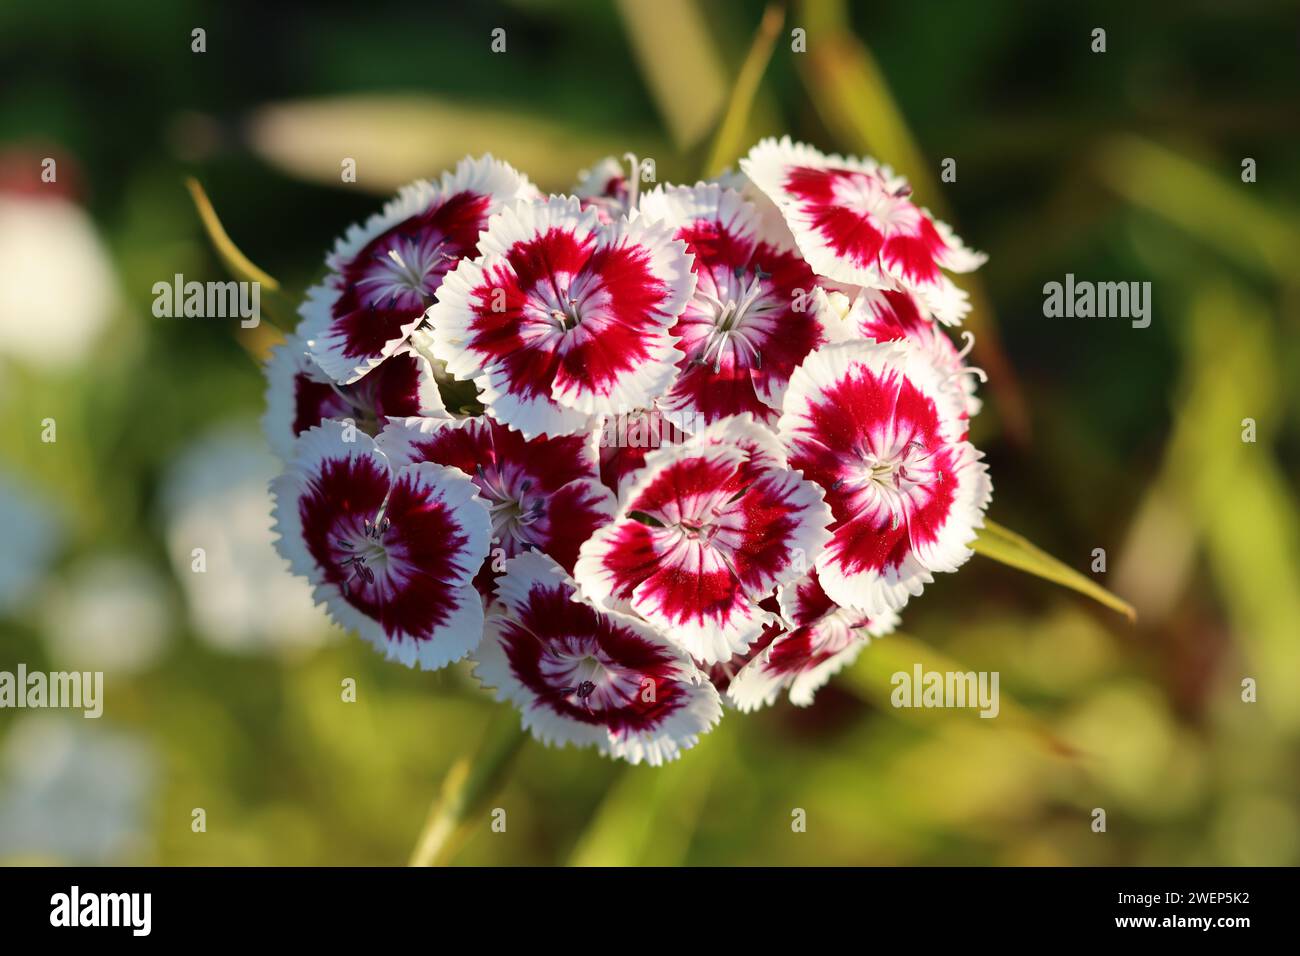 Single red and white dianthus or sweet william flower Stock Photo